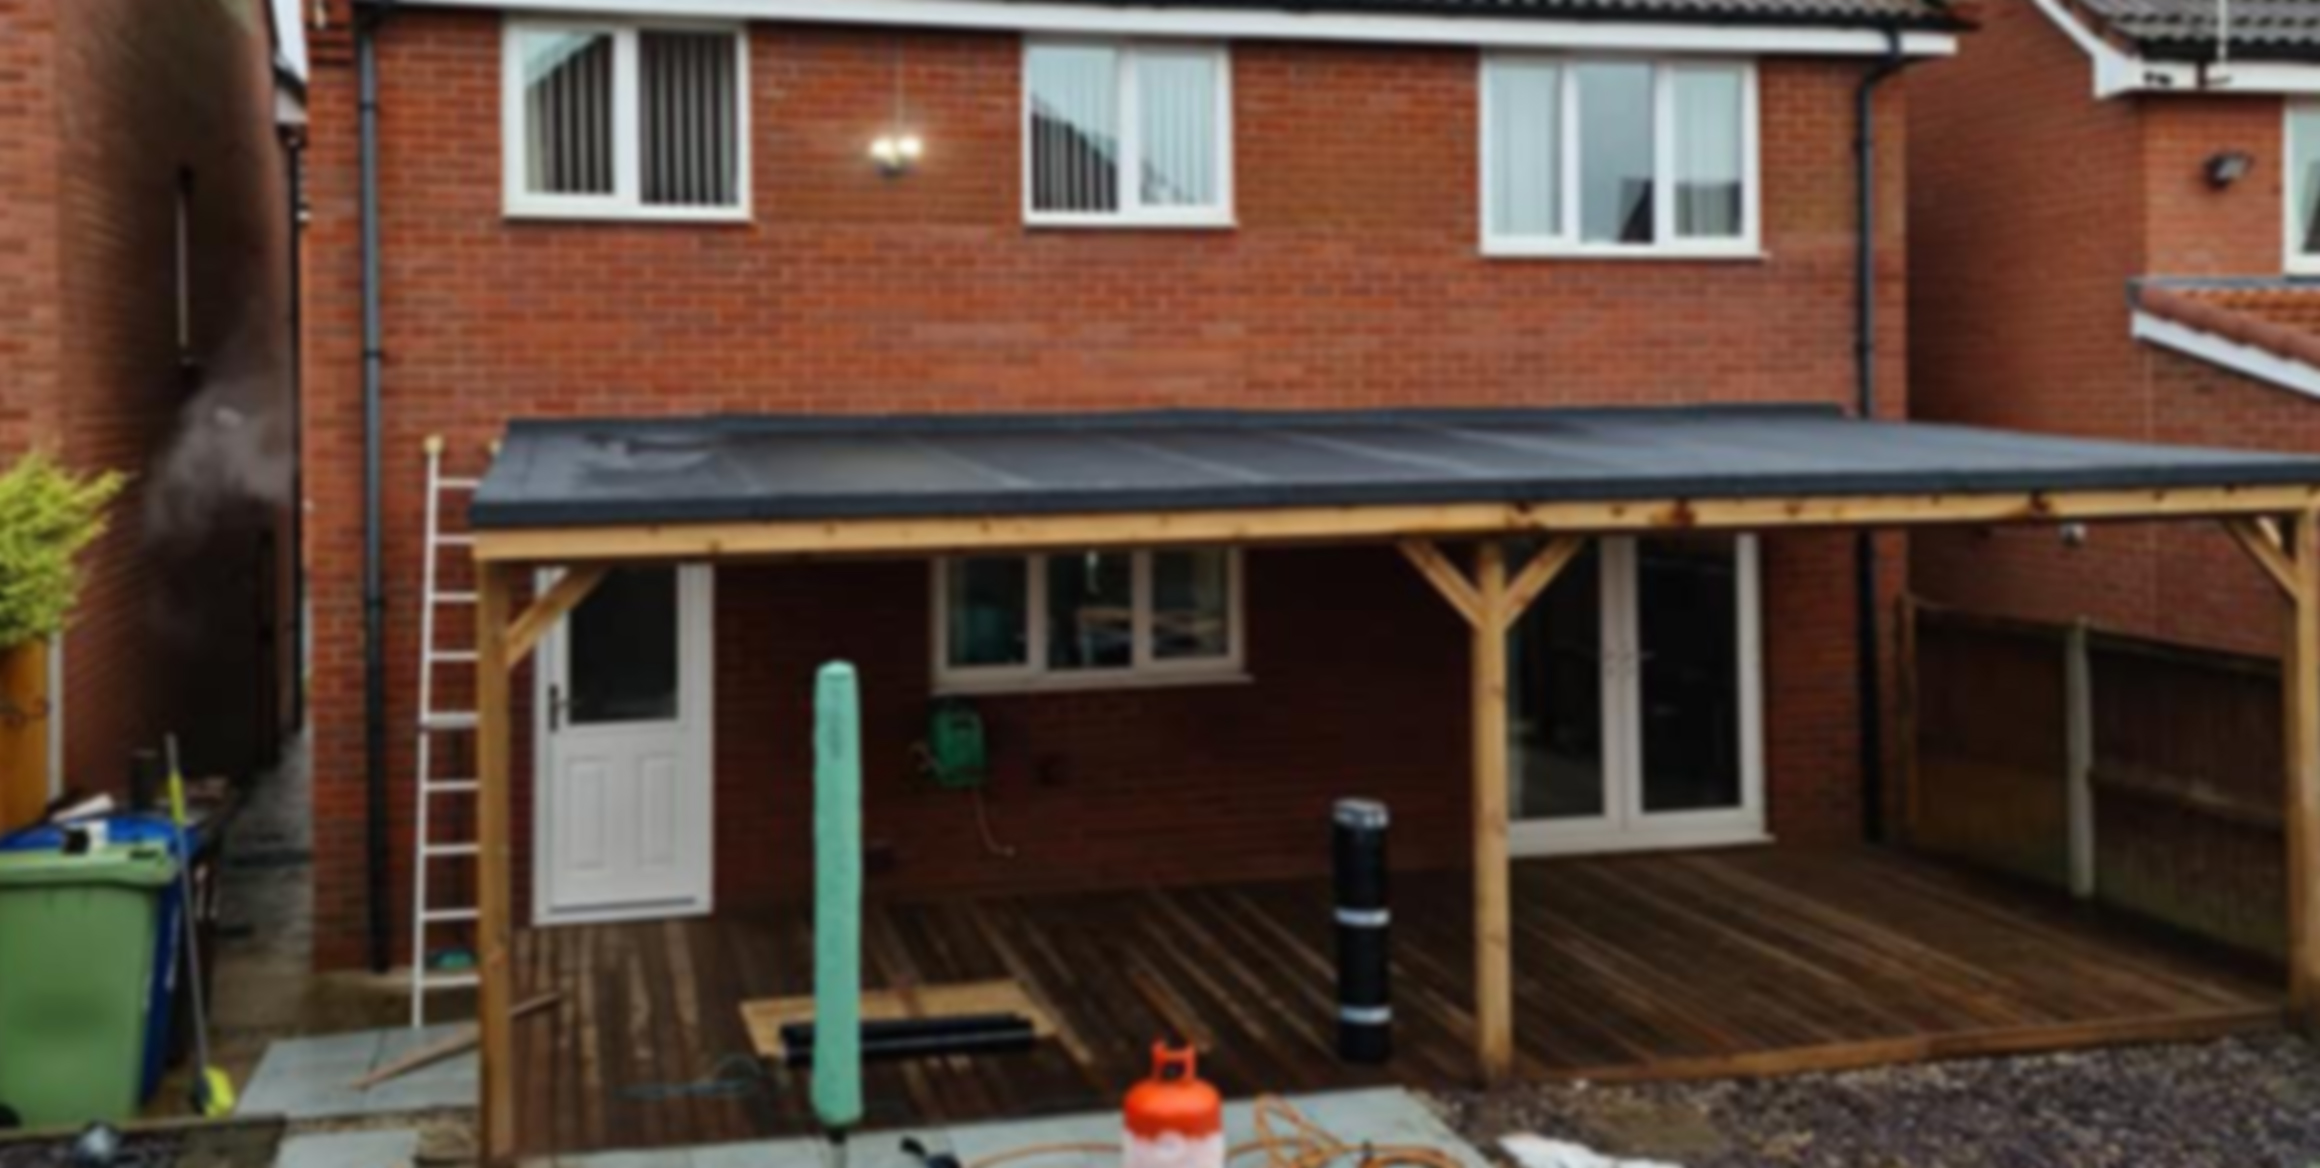 Fascias, Soffits and Guttering in Wigan